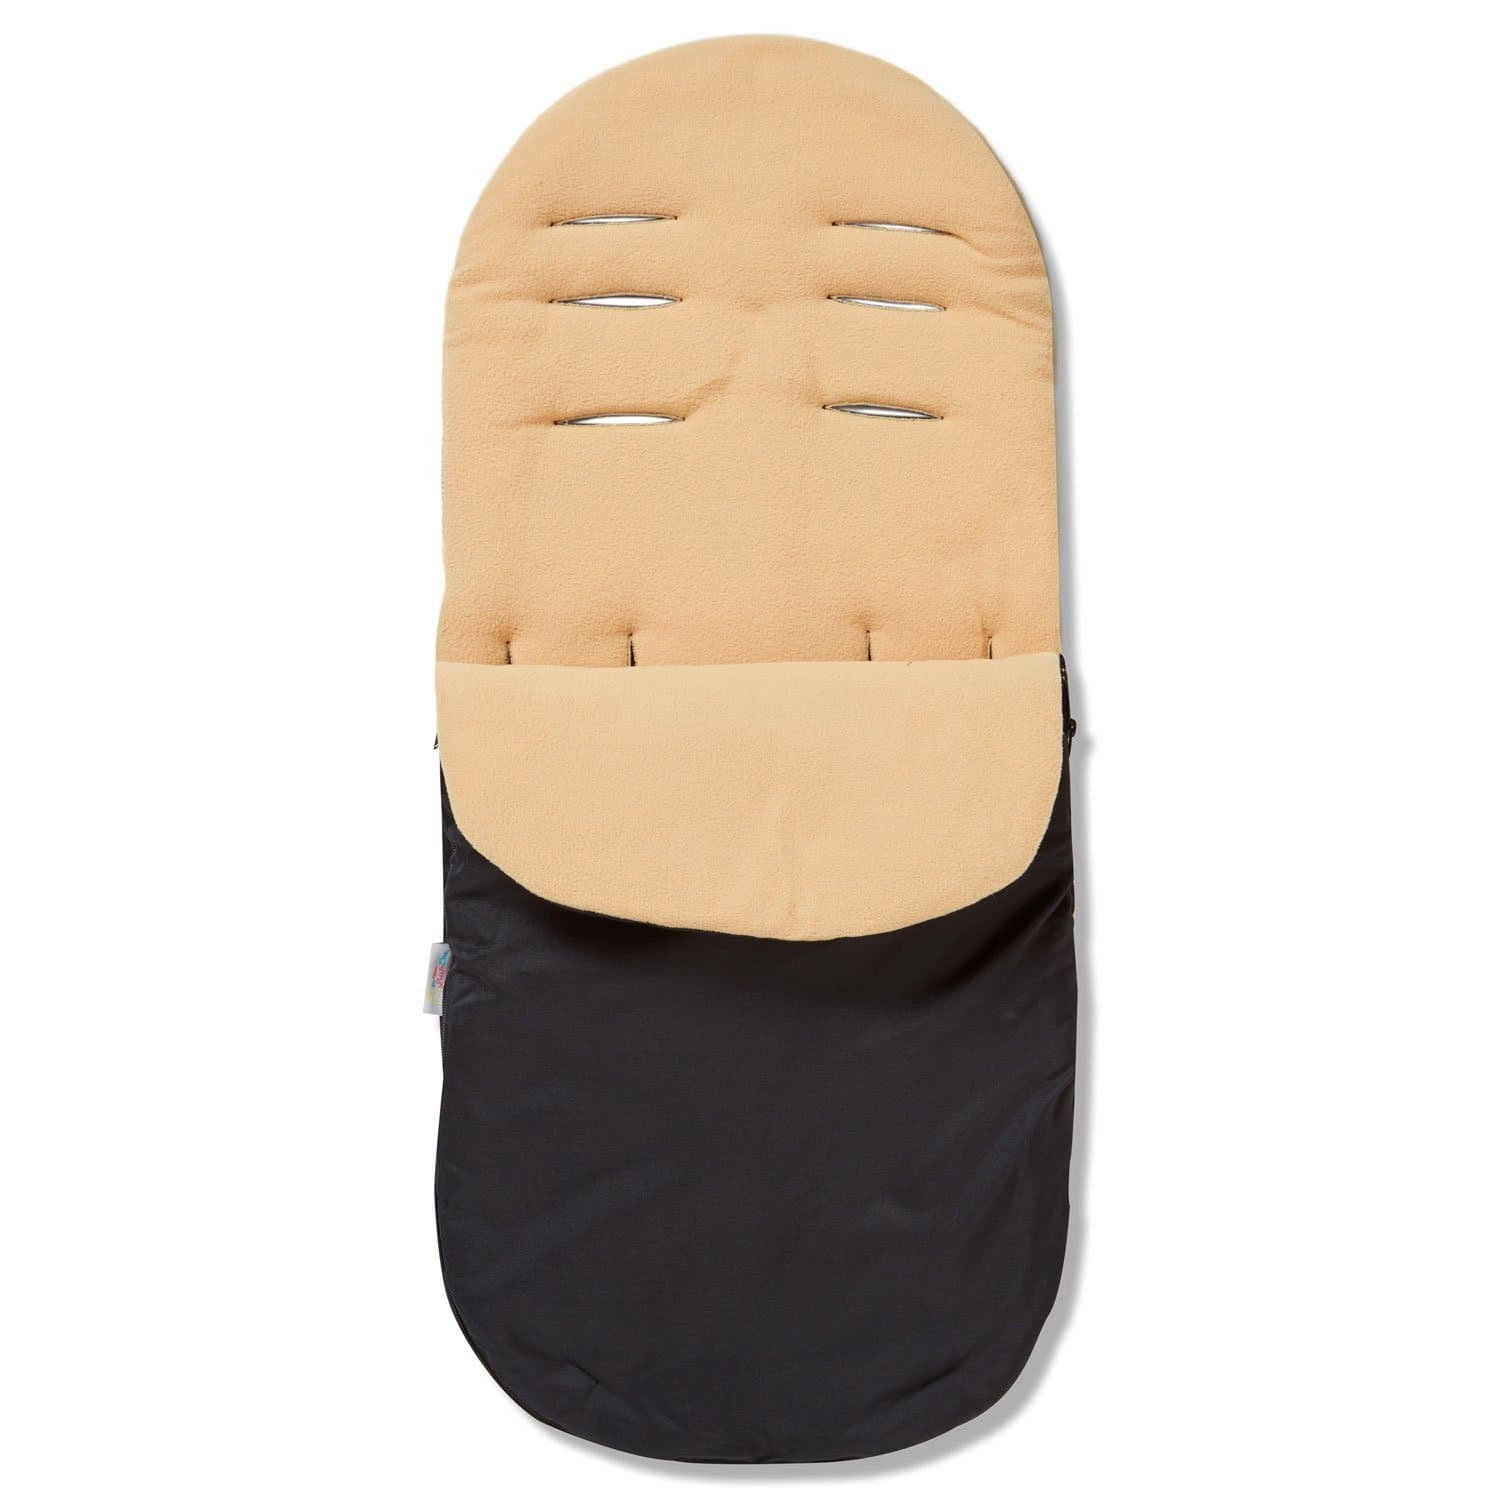 Footmuff / Cosy Toes Compatible with BabiesRus - Sand / Fits All Models | For Your Little One